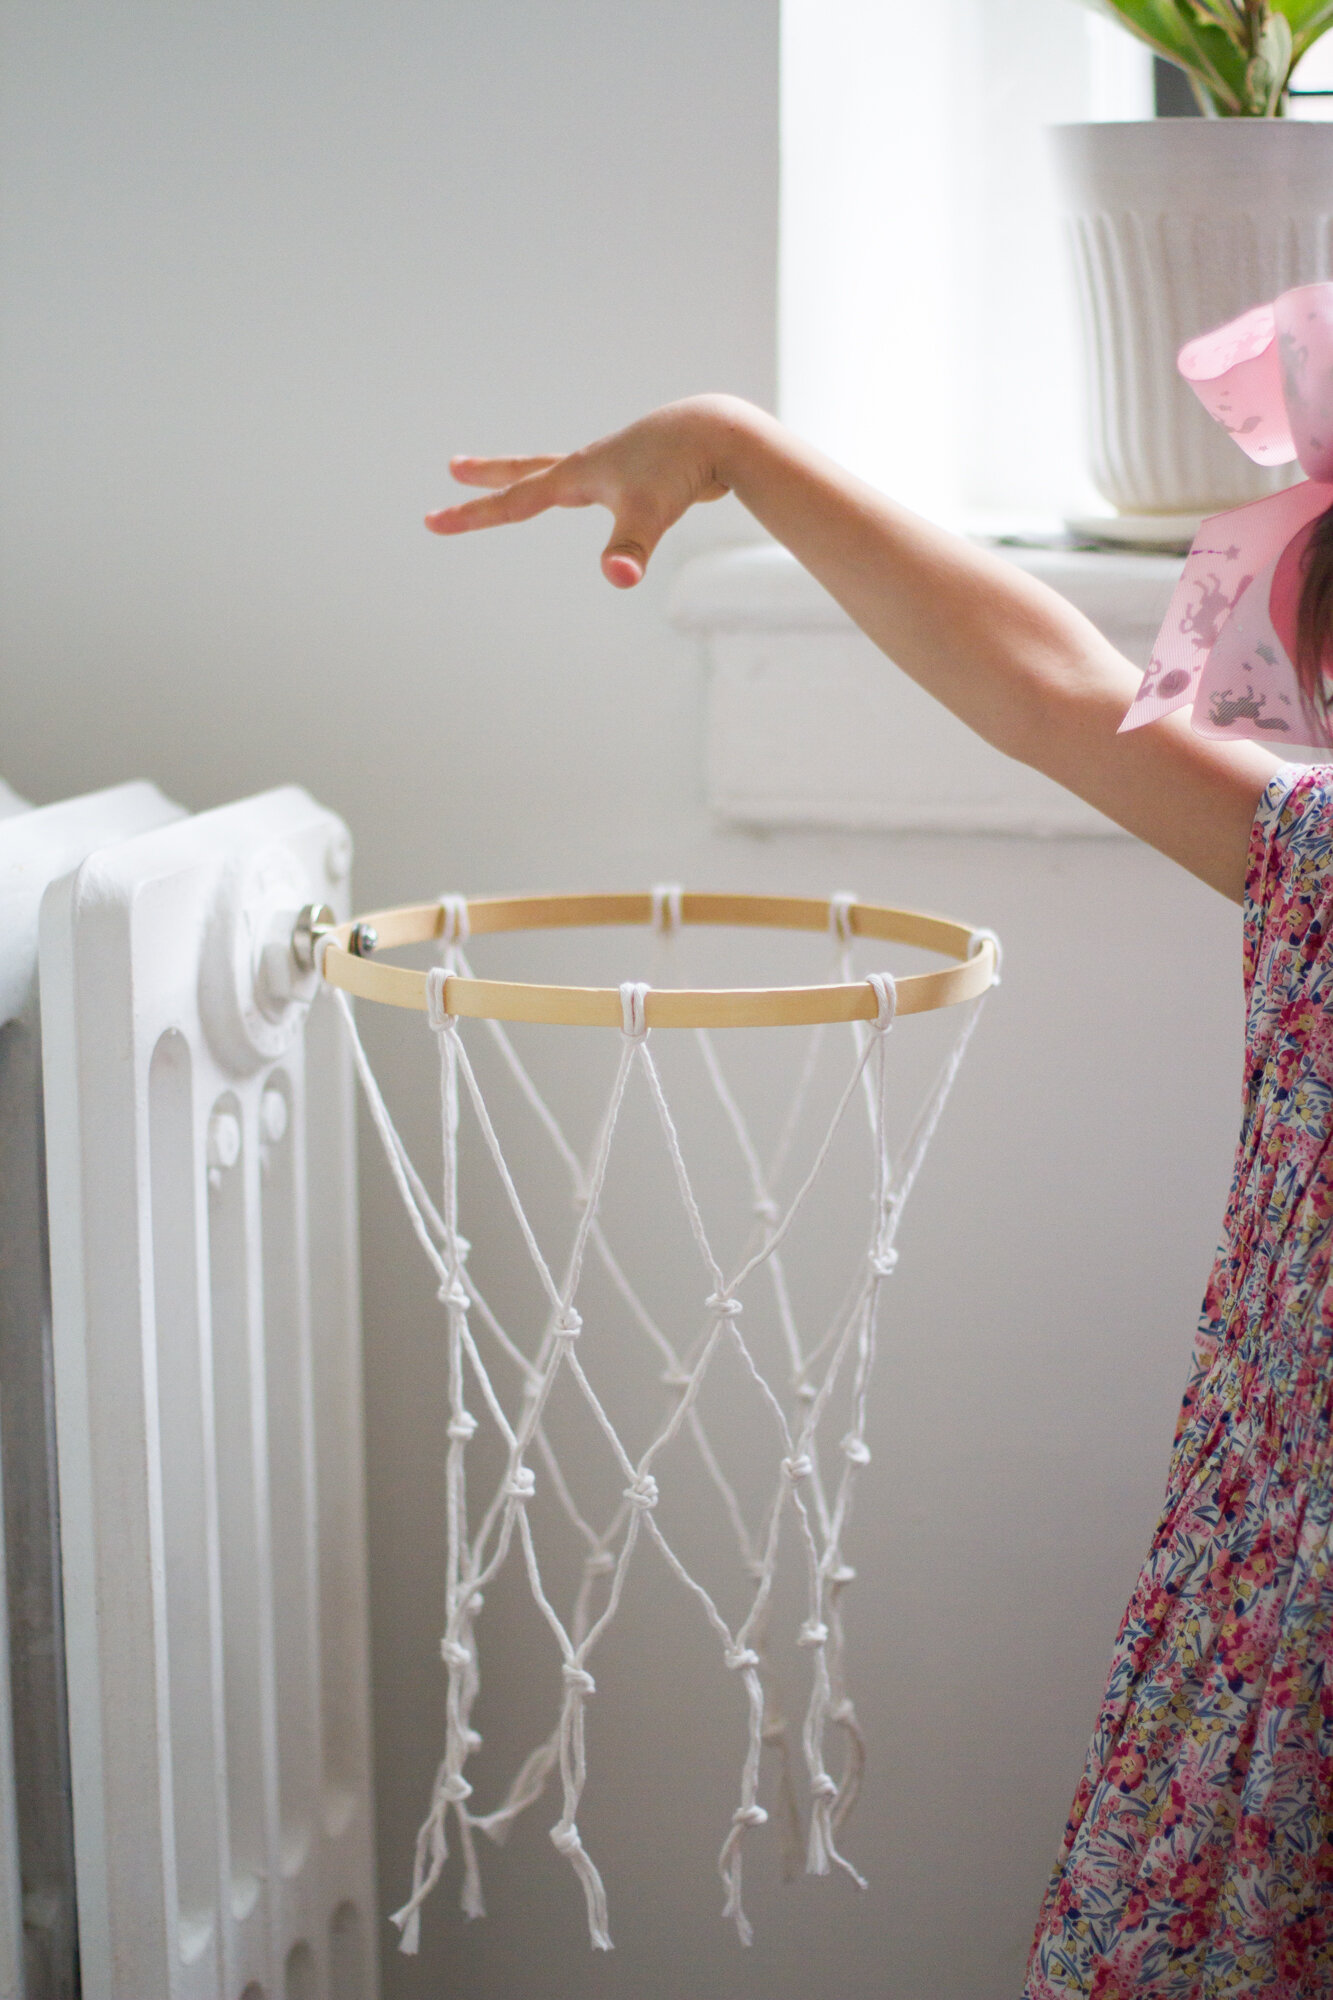 make your own: indoor basketball hoop. – Reading My Tea Leaves – Slow, simple, sustainable